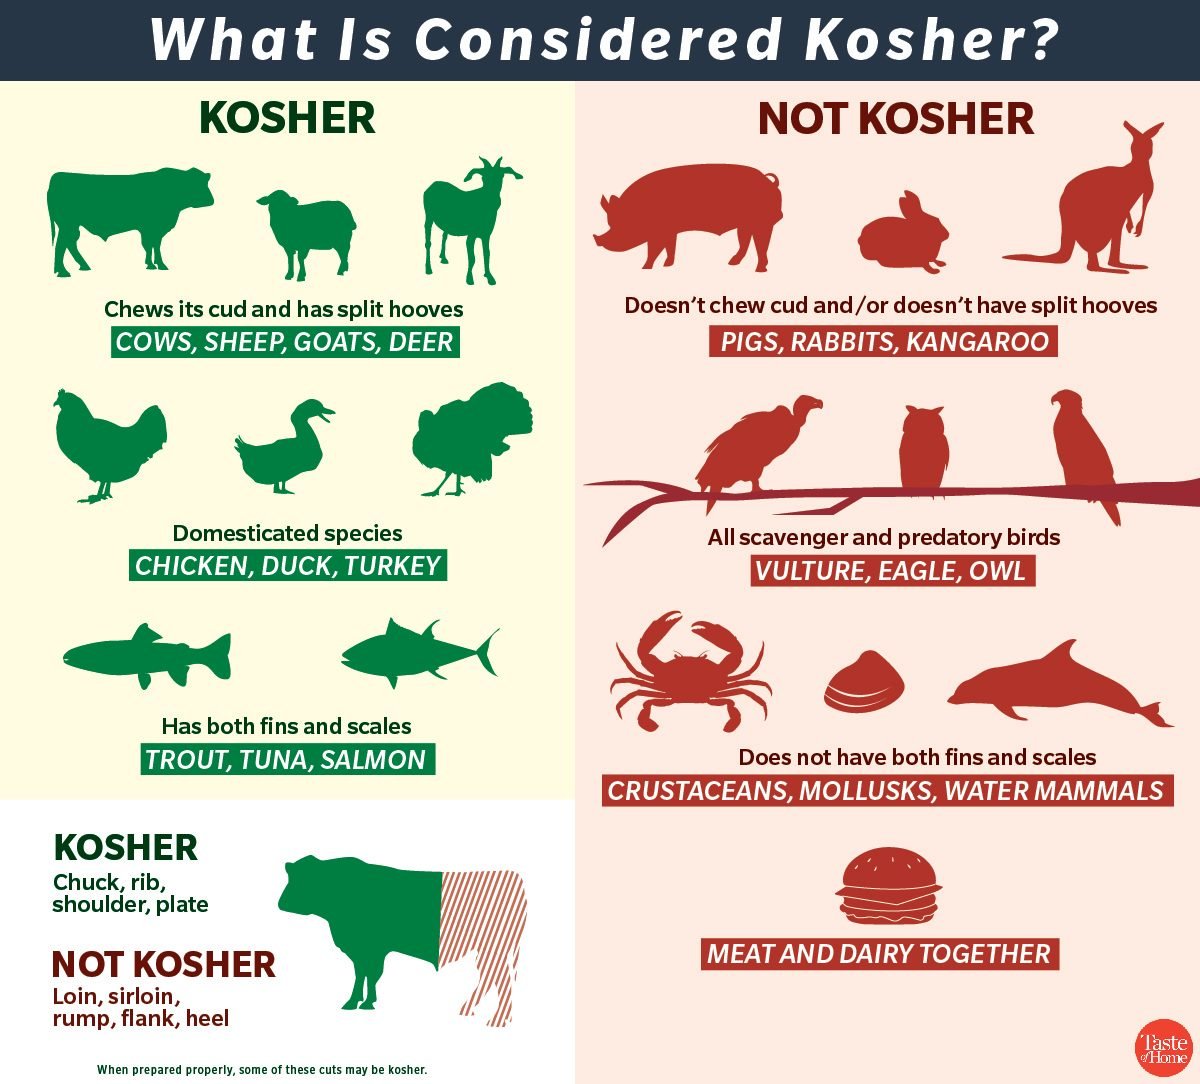 Kosher Cooking: Here's Everything You Need to Know